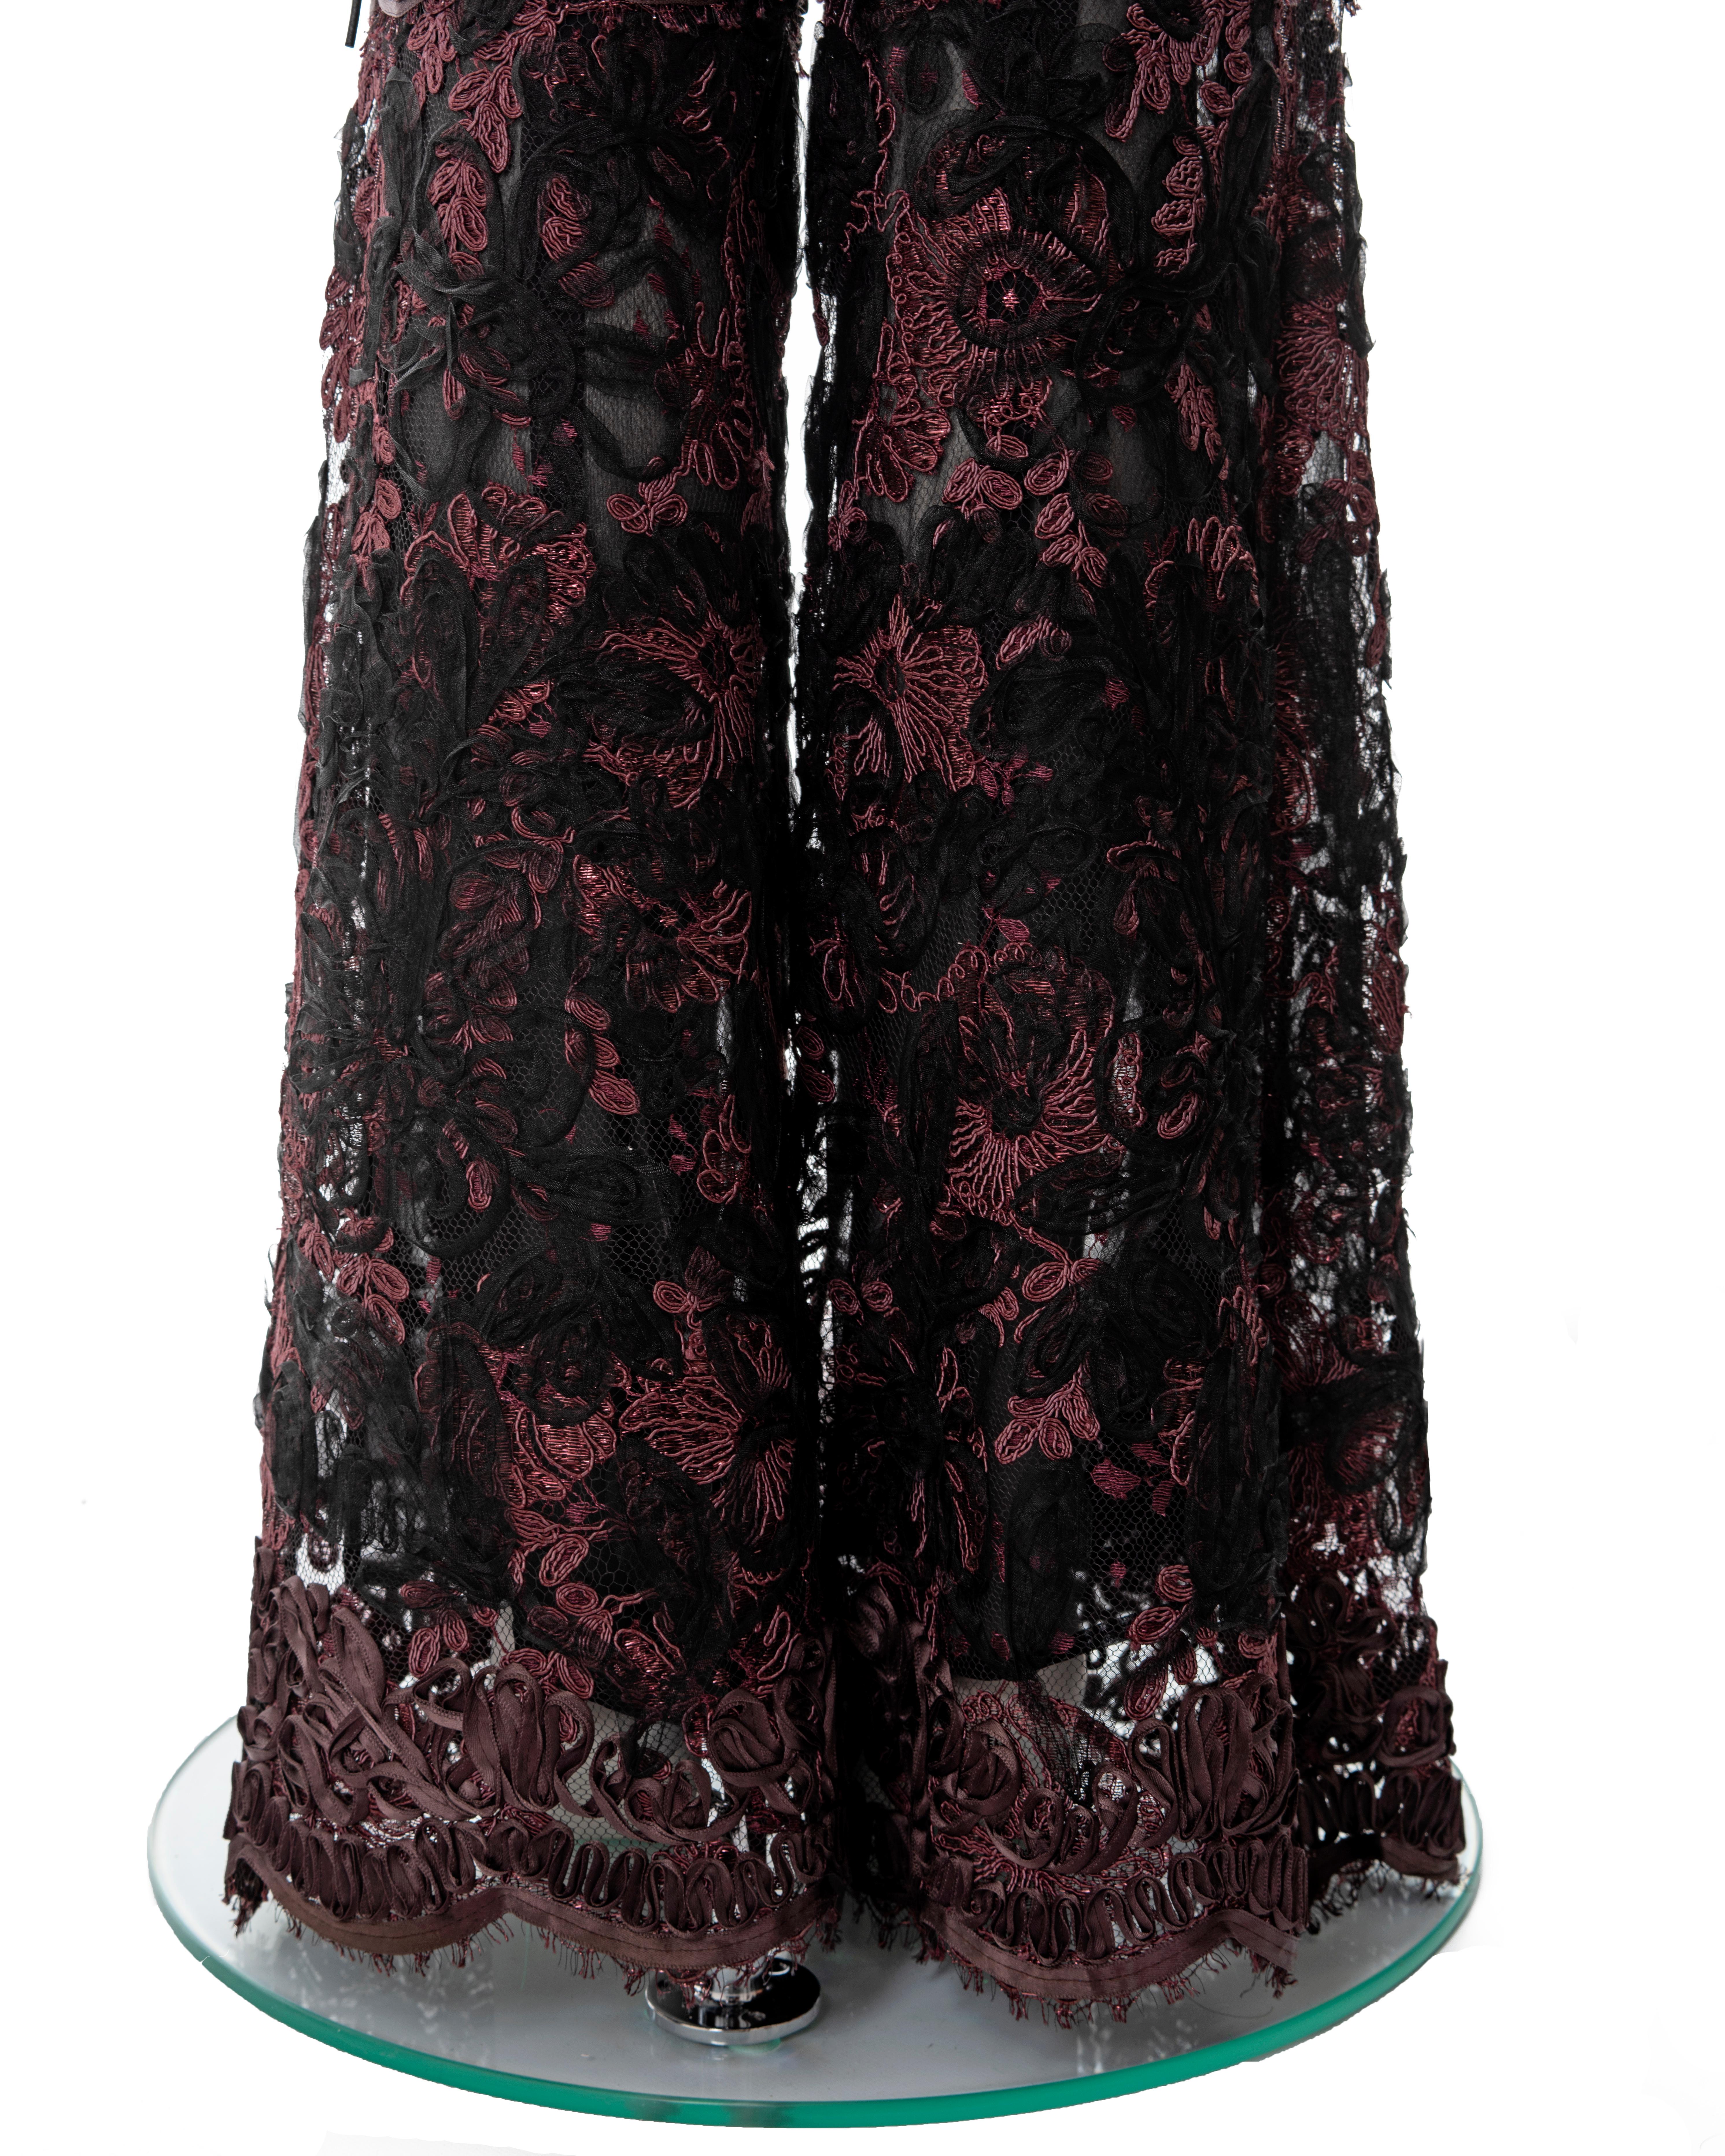 Gucci by Tom Ford burgundy lamé floral lace flared evening pants, fw 1999 For Sale 4